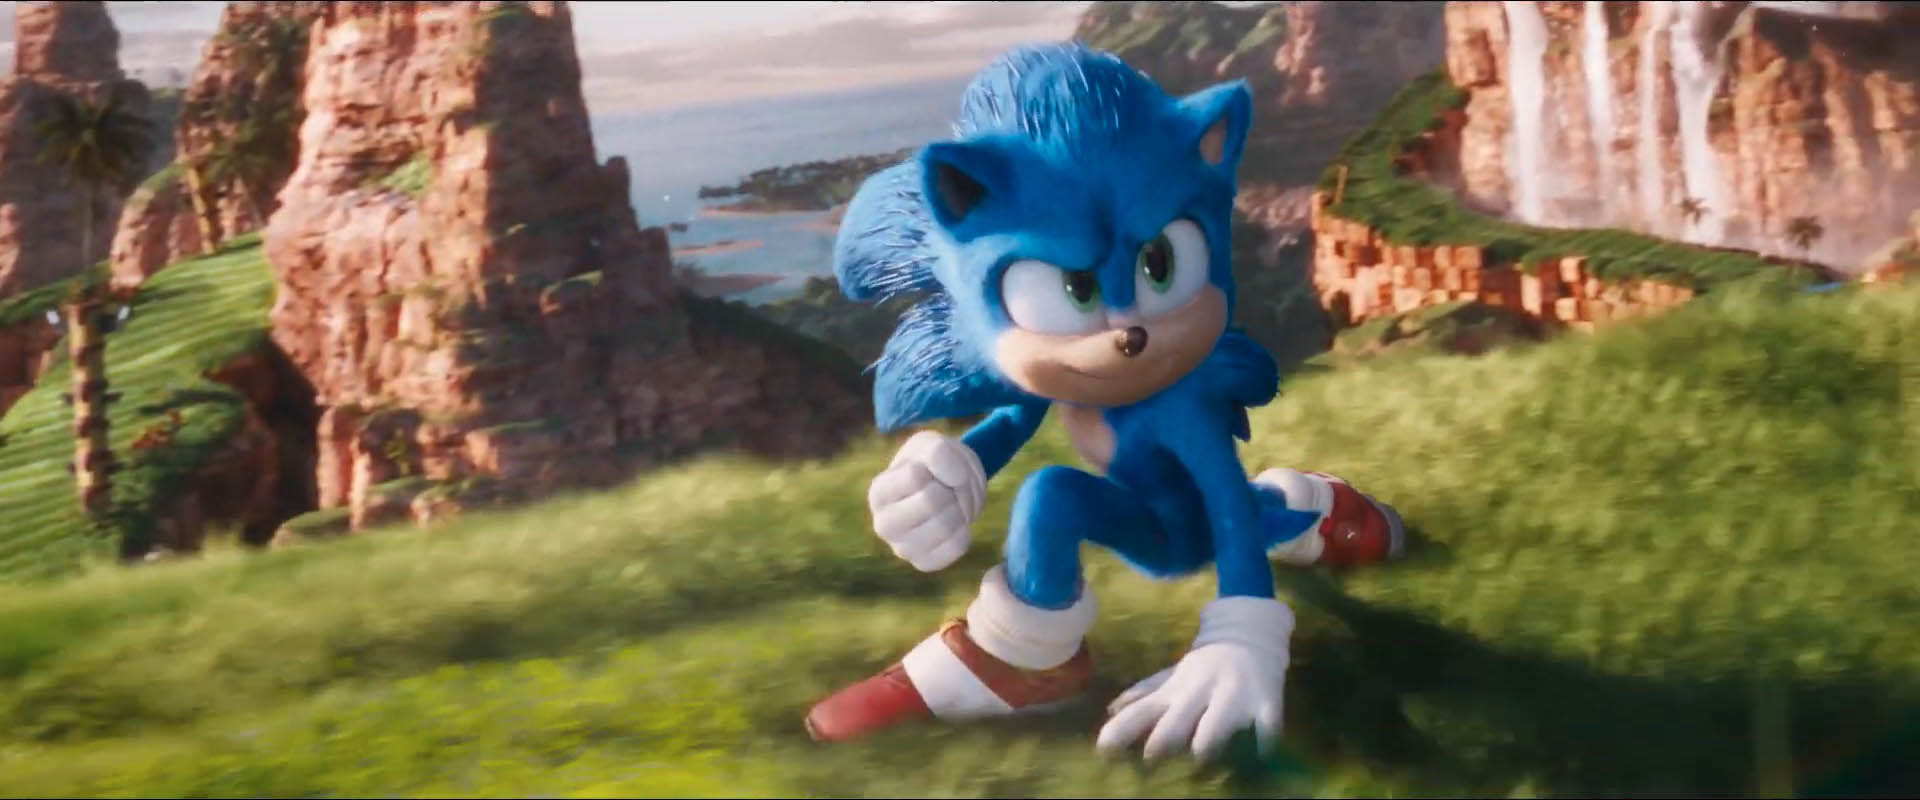 sonic the hedgehog 2 trailer unveiled at the game awards